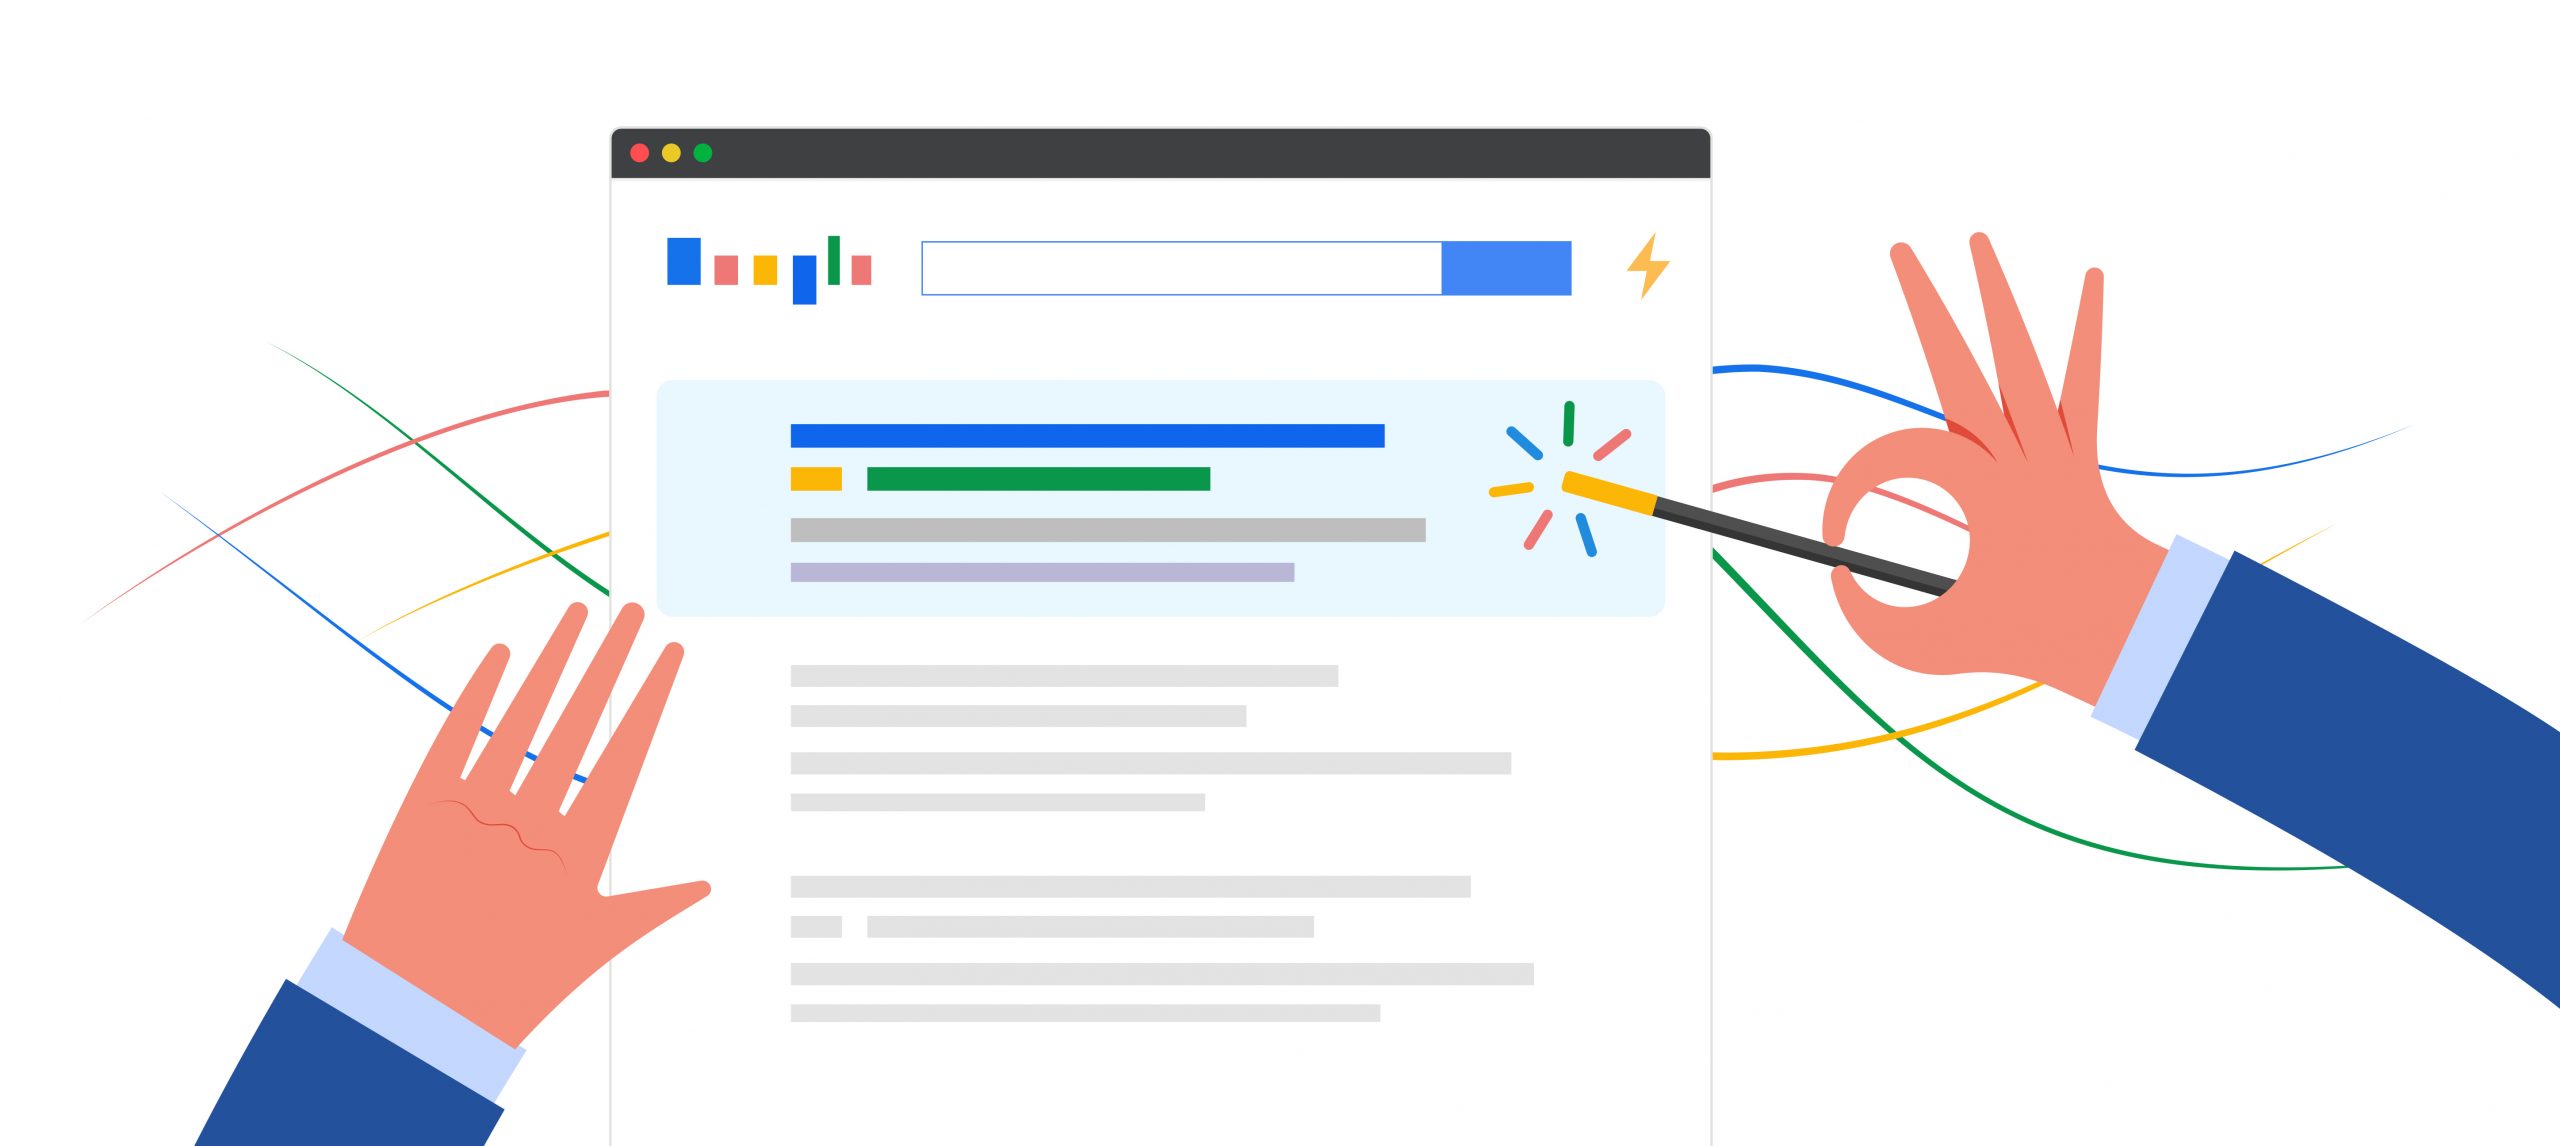 Google Search Results page Graphic with hands and magic wand